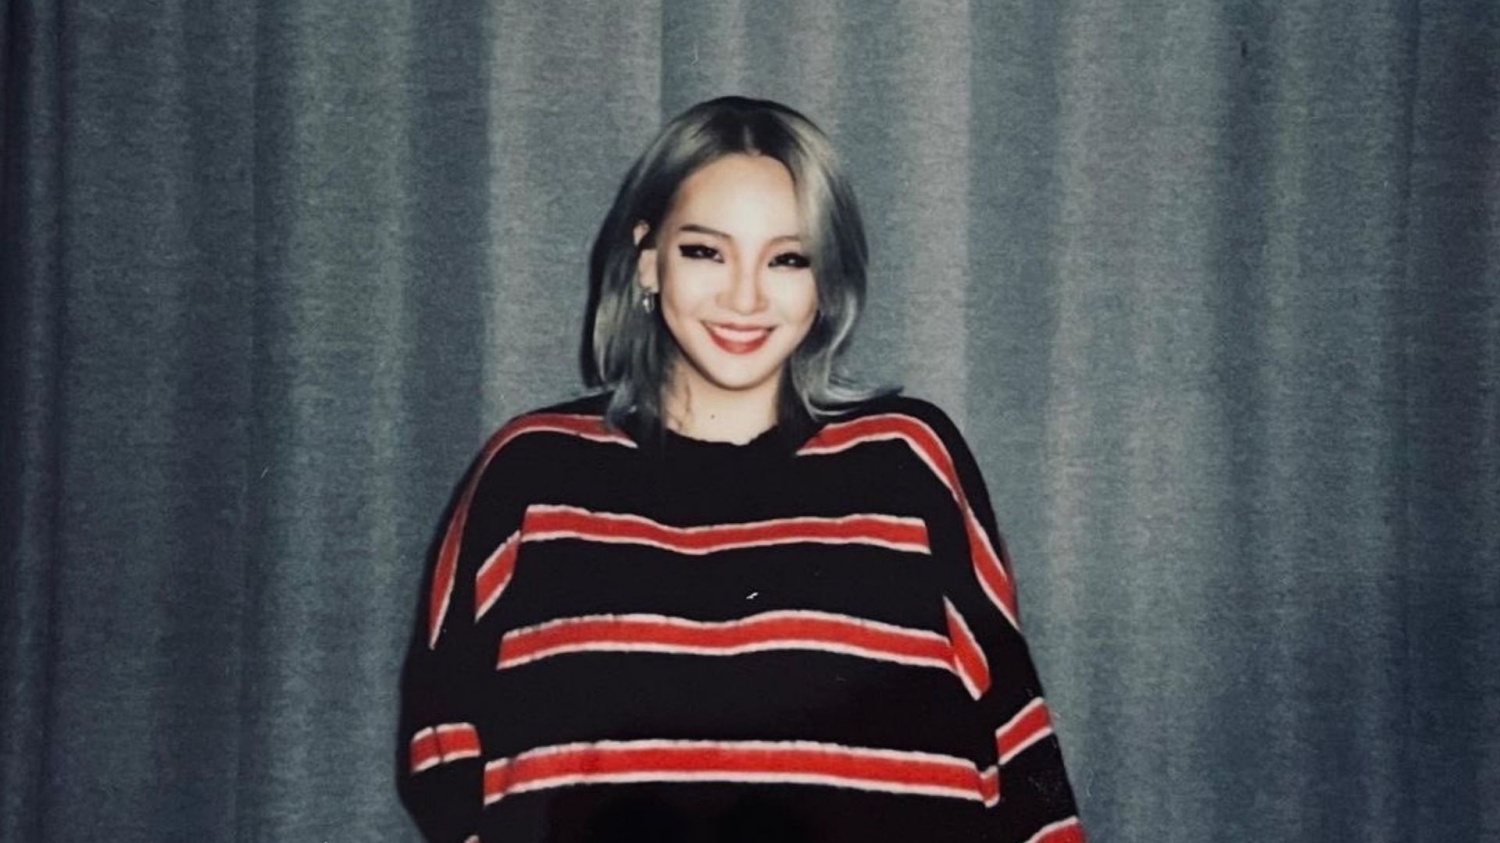 Cl Relationship Status 2021 Why Was She Linked To British Model Ash Stymest And Dpr Ian